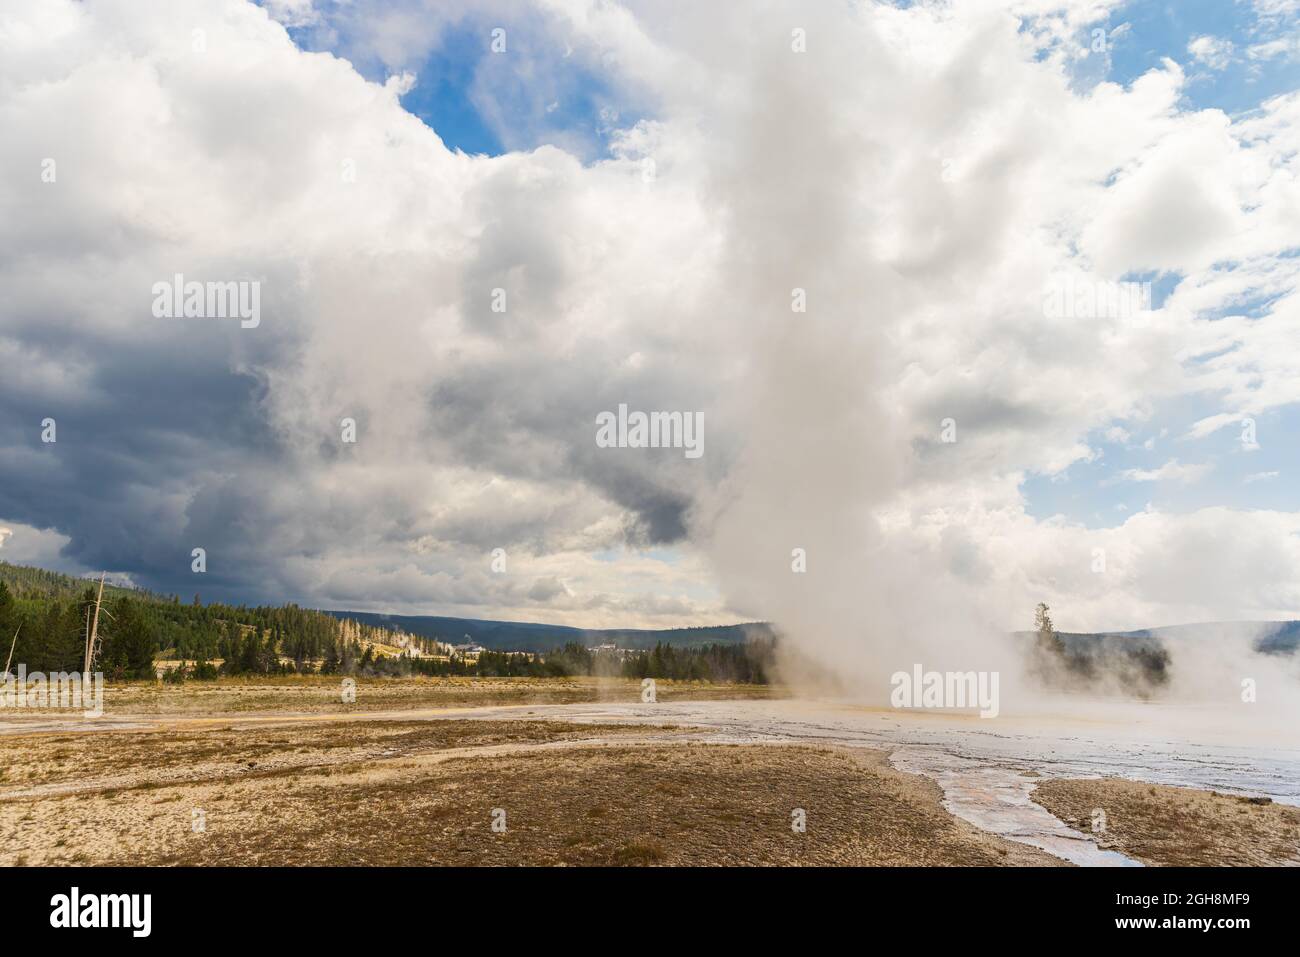 Eruption of the Old Faithful Geyser at Yellowstone National Park Stock Photo